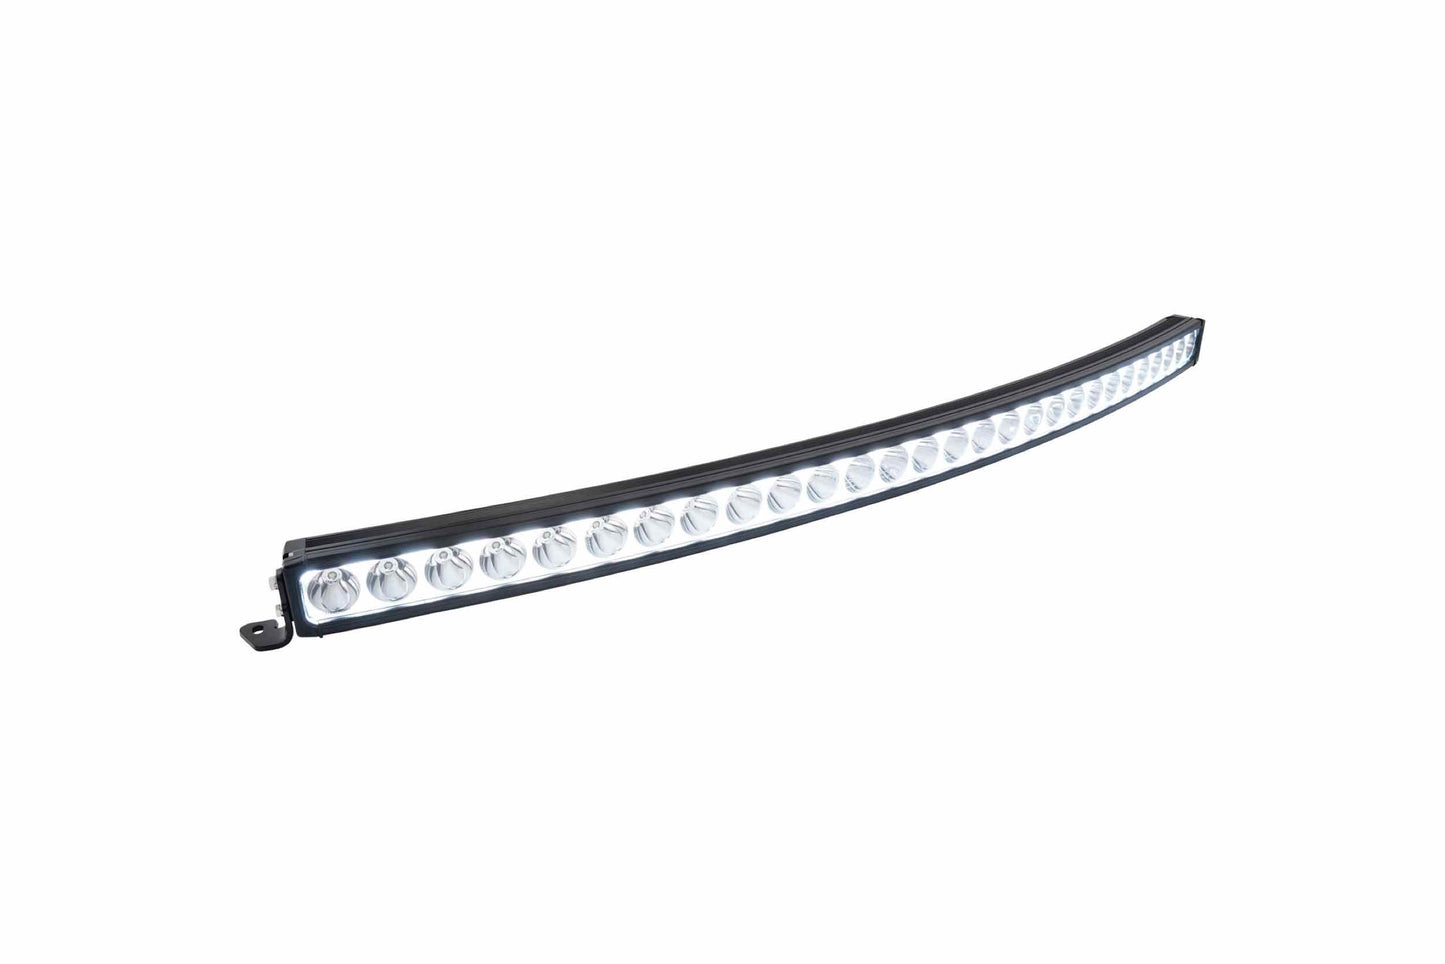 Vision X Light Bar: 20in (11-LED / 110W / XPR Curved + Halo / with Foot-Mounts & Harness)